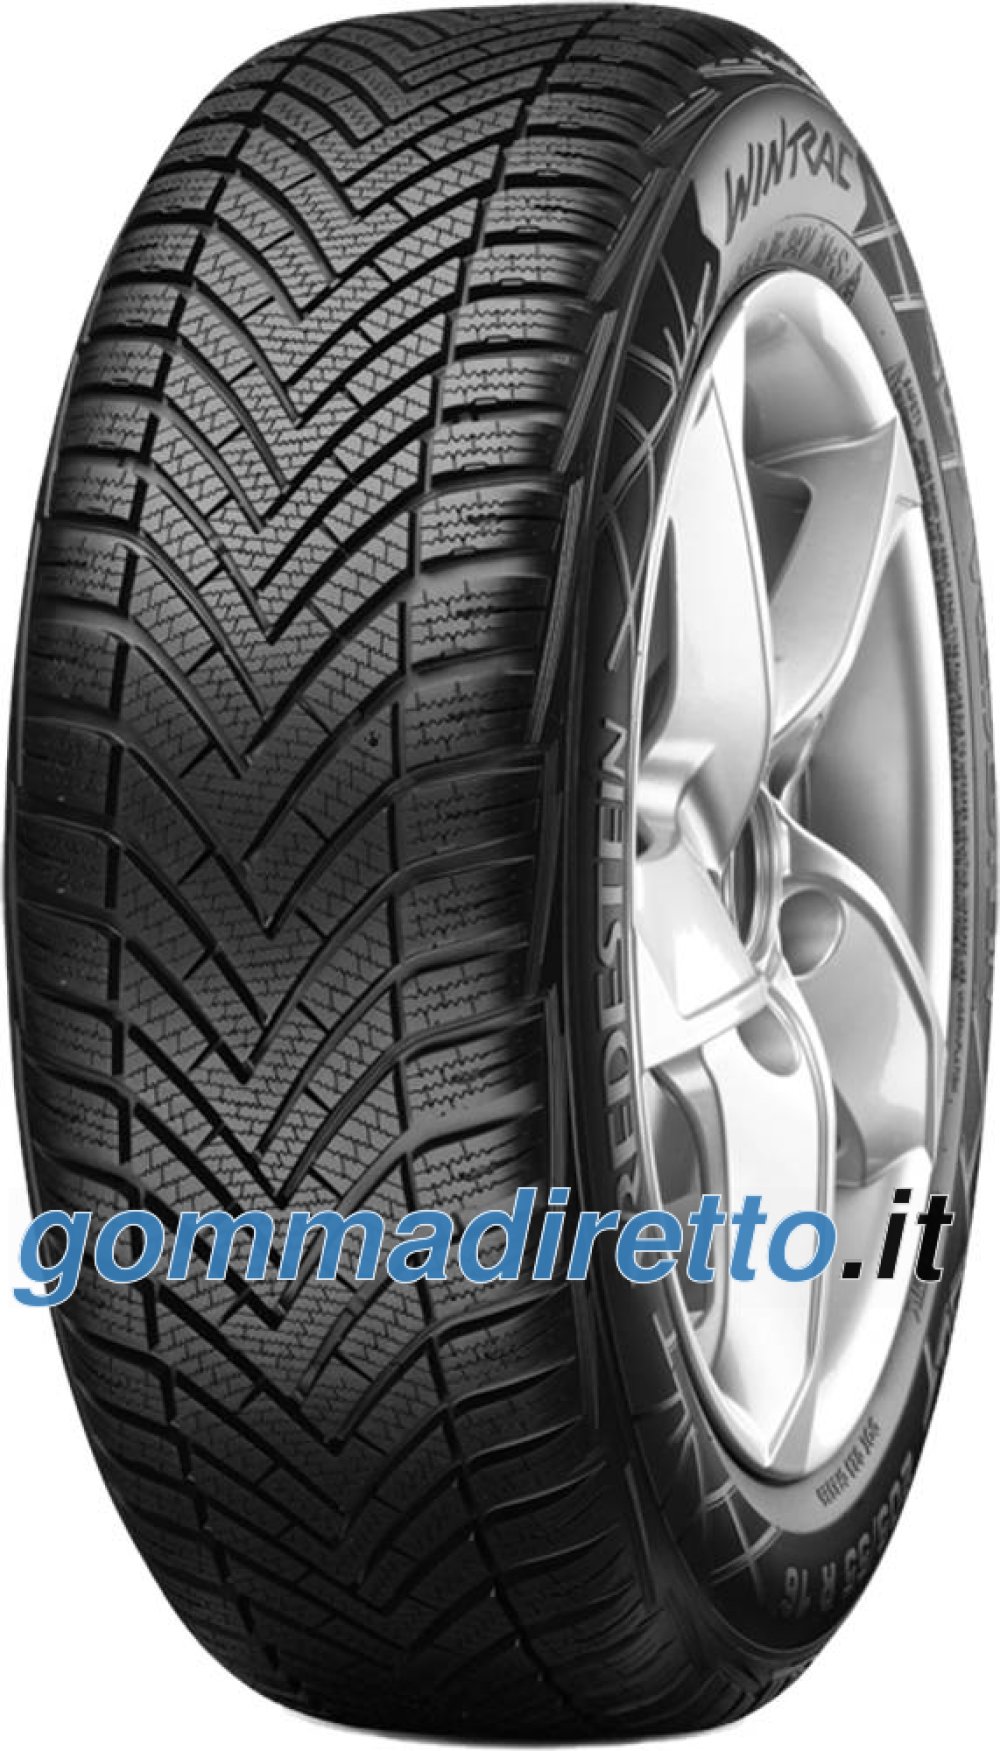 Image of Vredestein Wintrac ( 205/55 R16 94V XL )